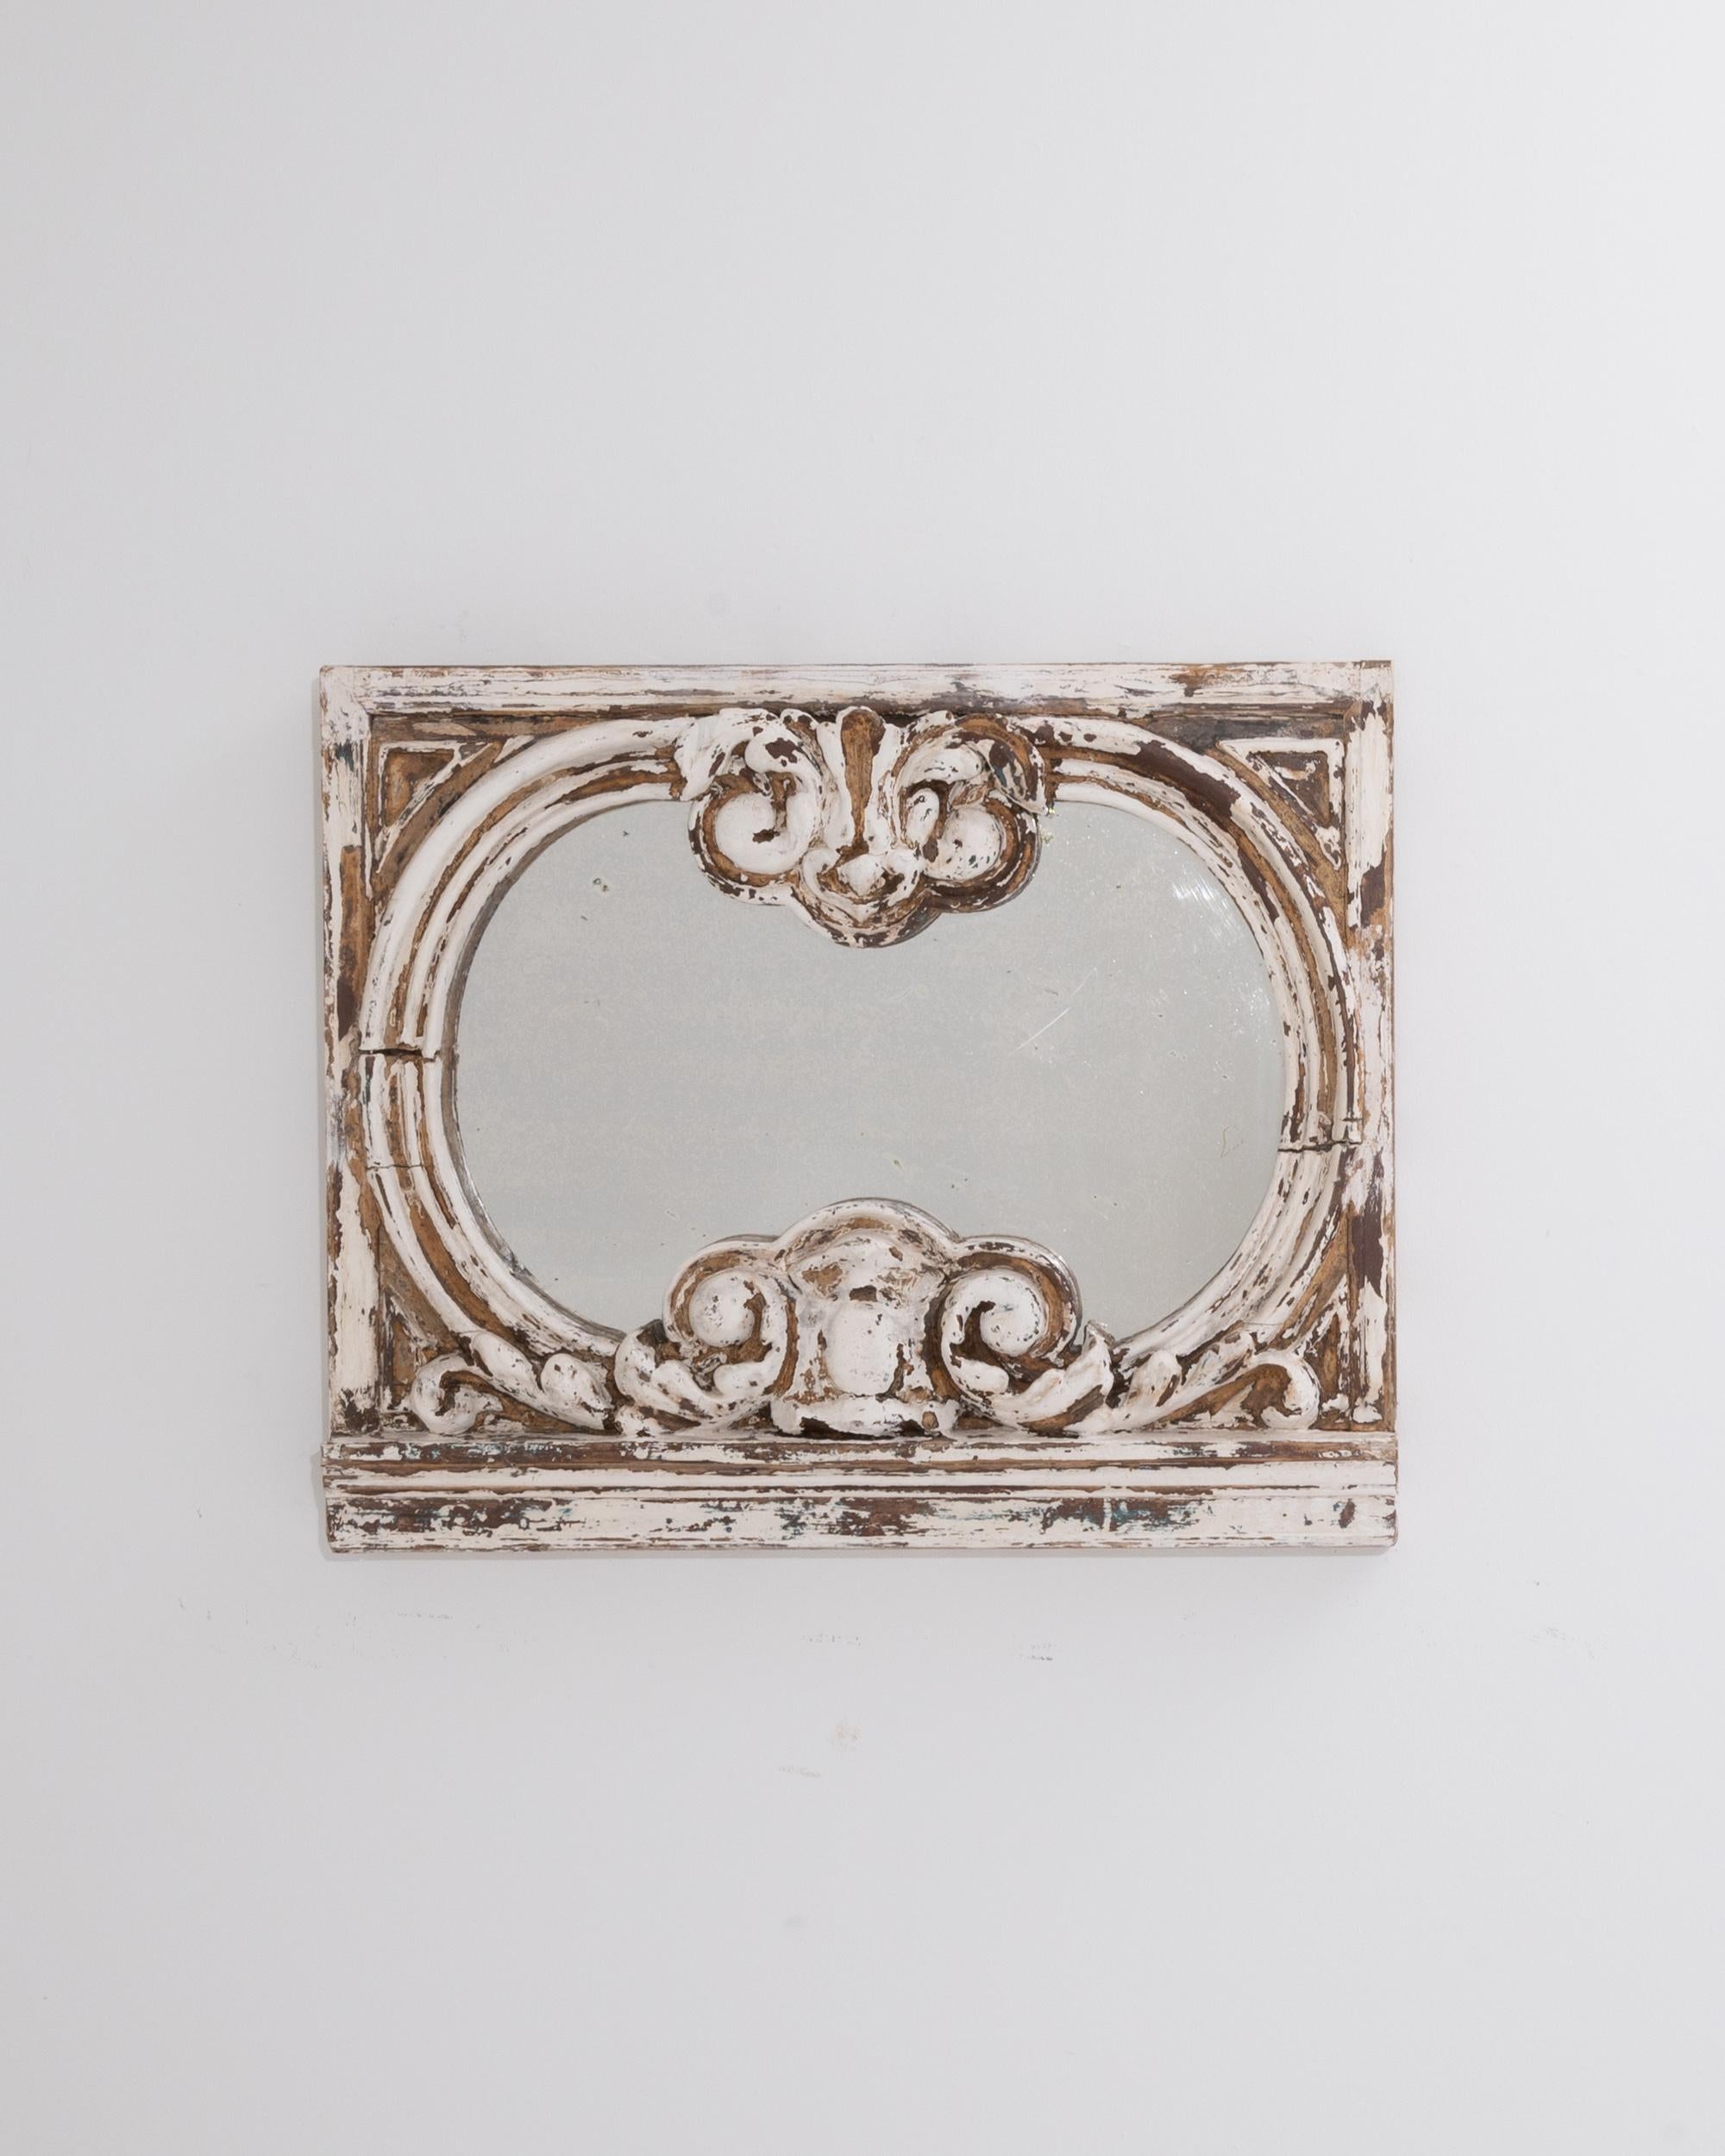 A timeworn patina gives this antique wooden mirror an eye-catching personality. Made in France in the 1800s, the pronounced forms and deep relief of the carved wooden frame create an impression of Baroque grandeur. Bold curves parenthesize the